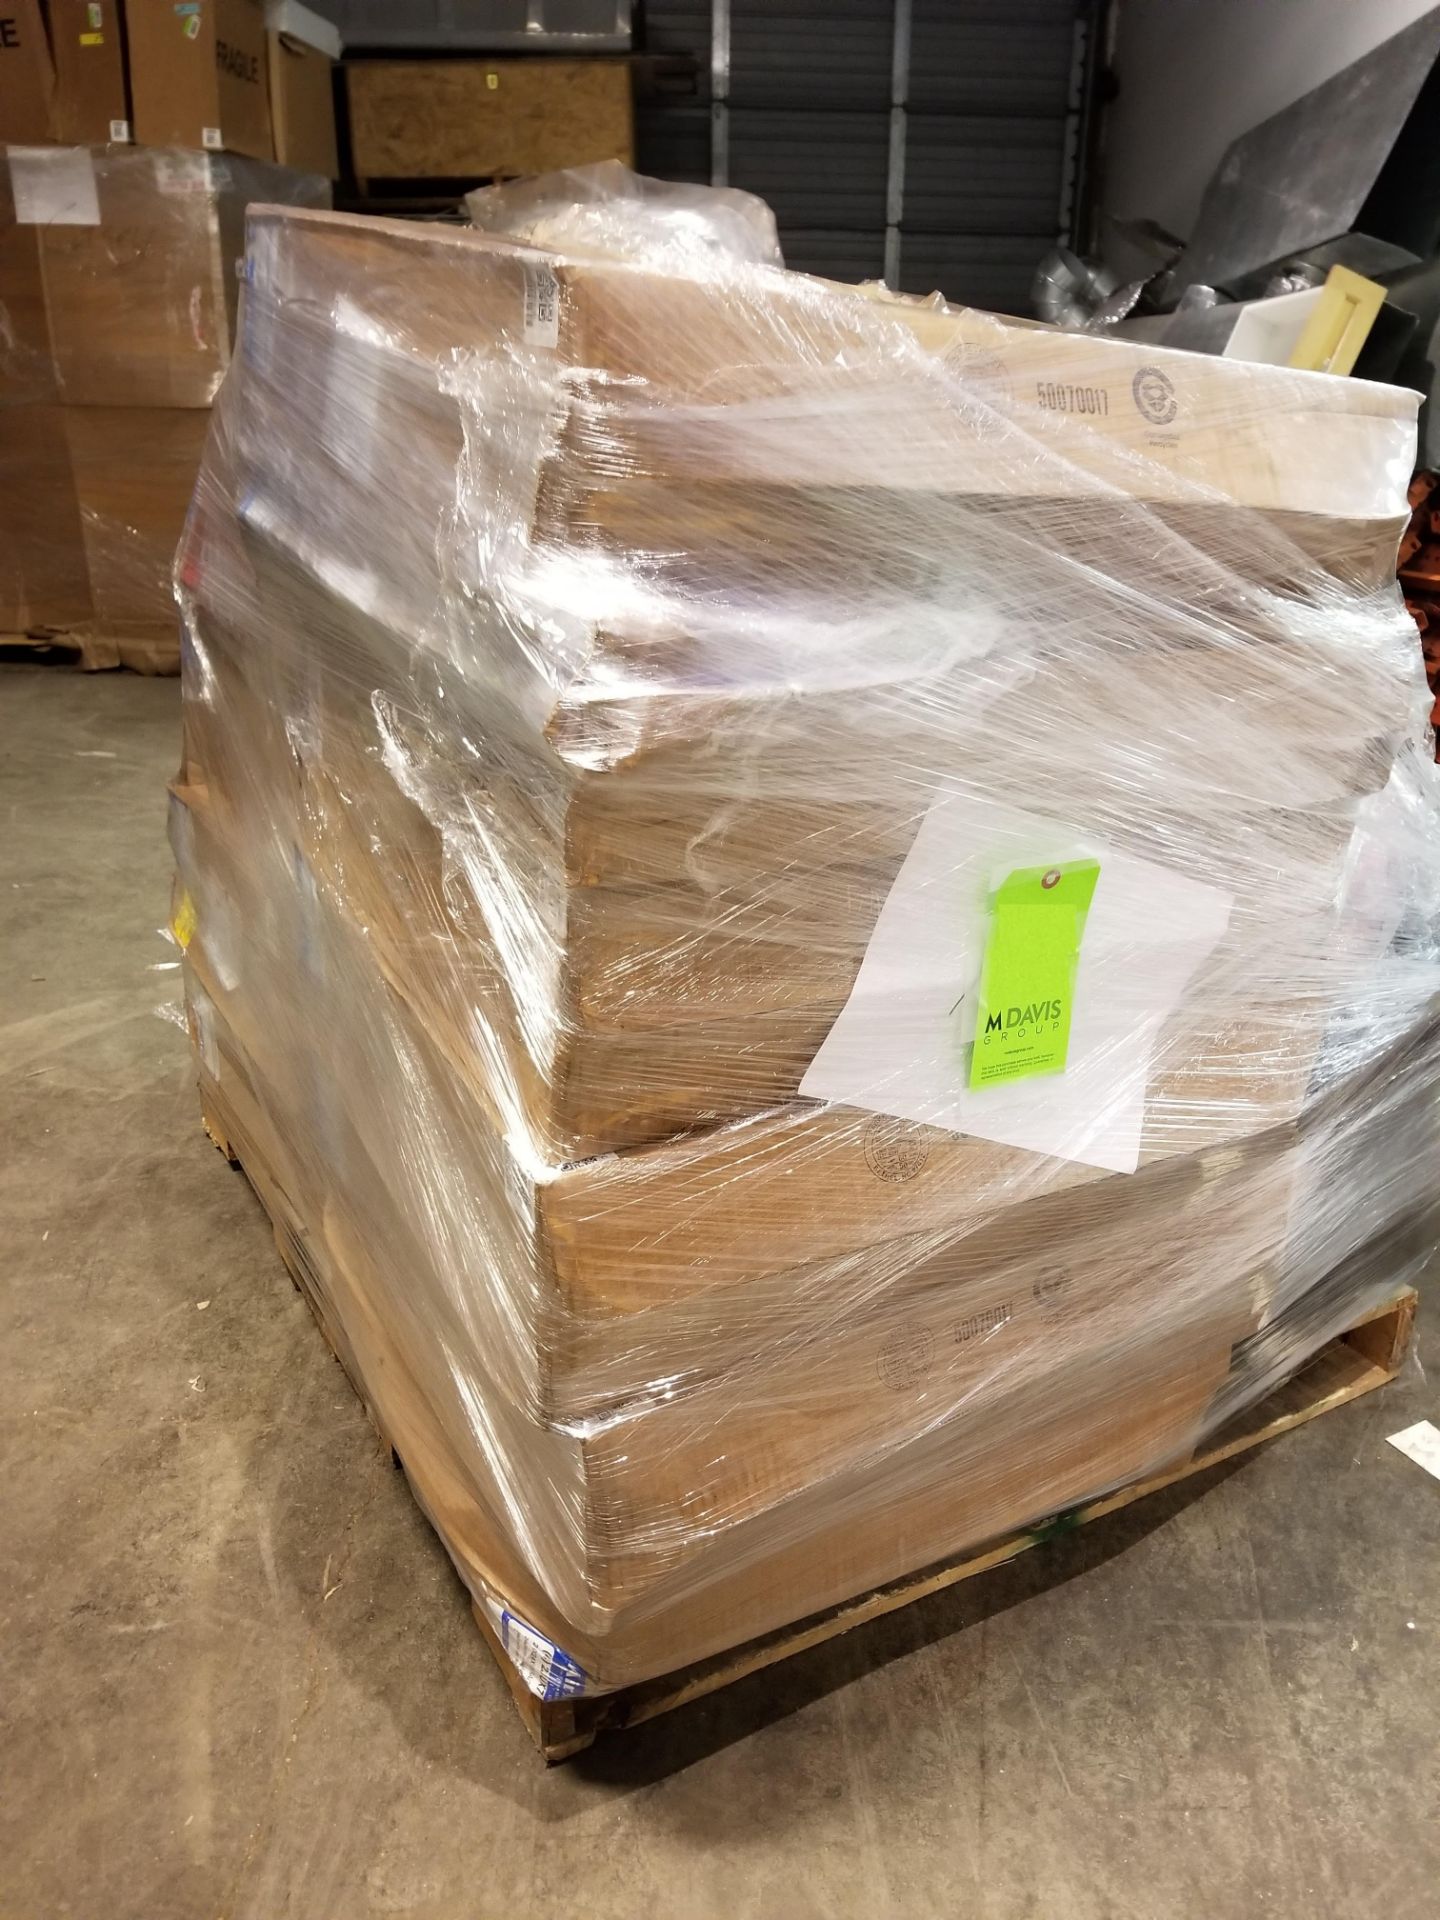 Whole 3 pallets, 137 air filters: New filters. Grainger#: 5E845(2); 5W426(2); 5M317(11); 2GHT1;